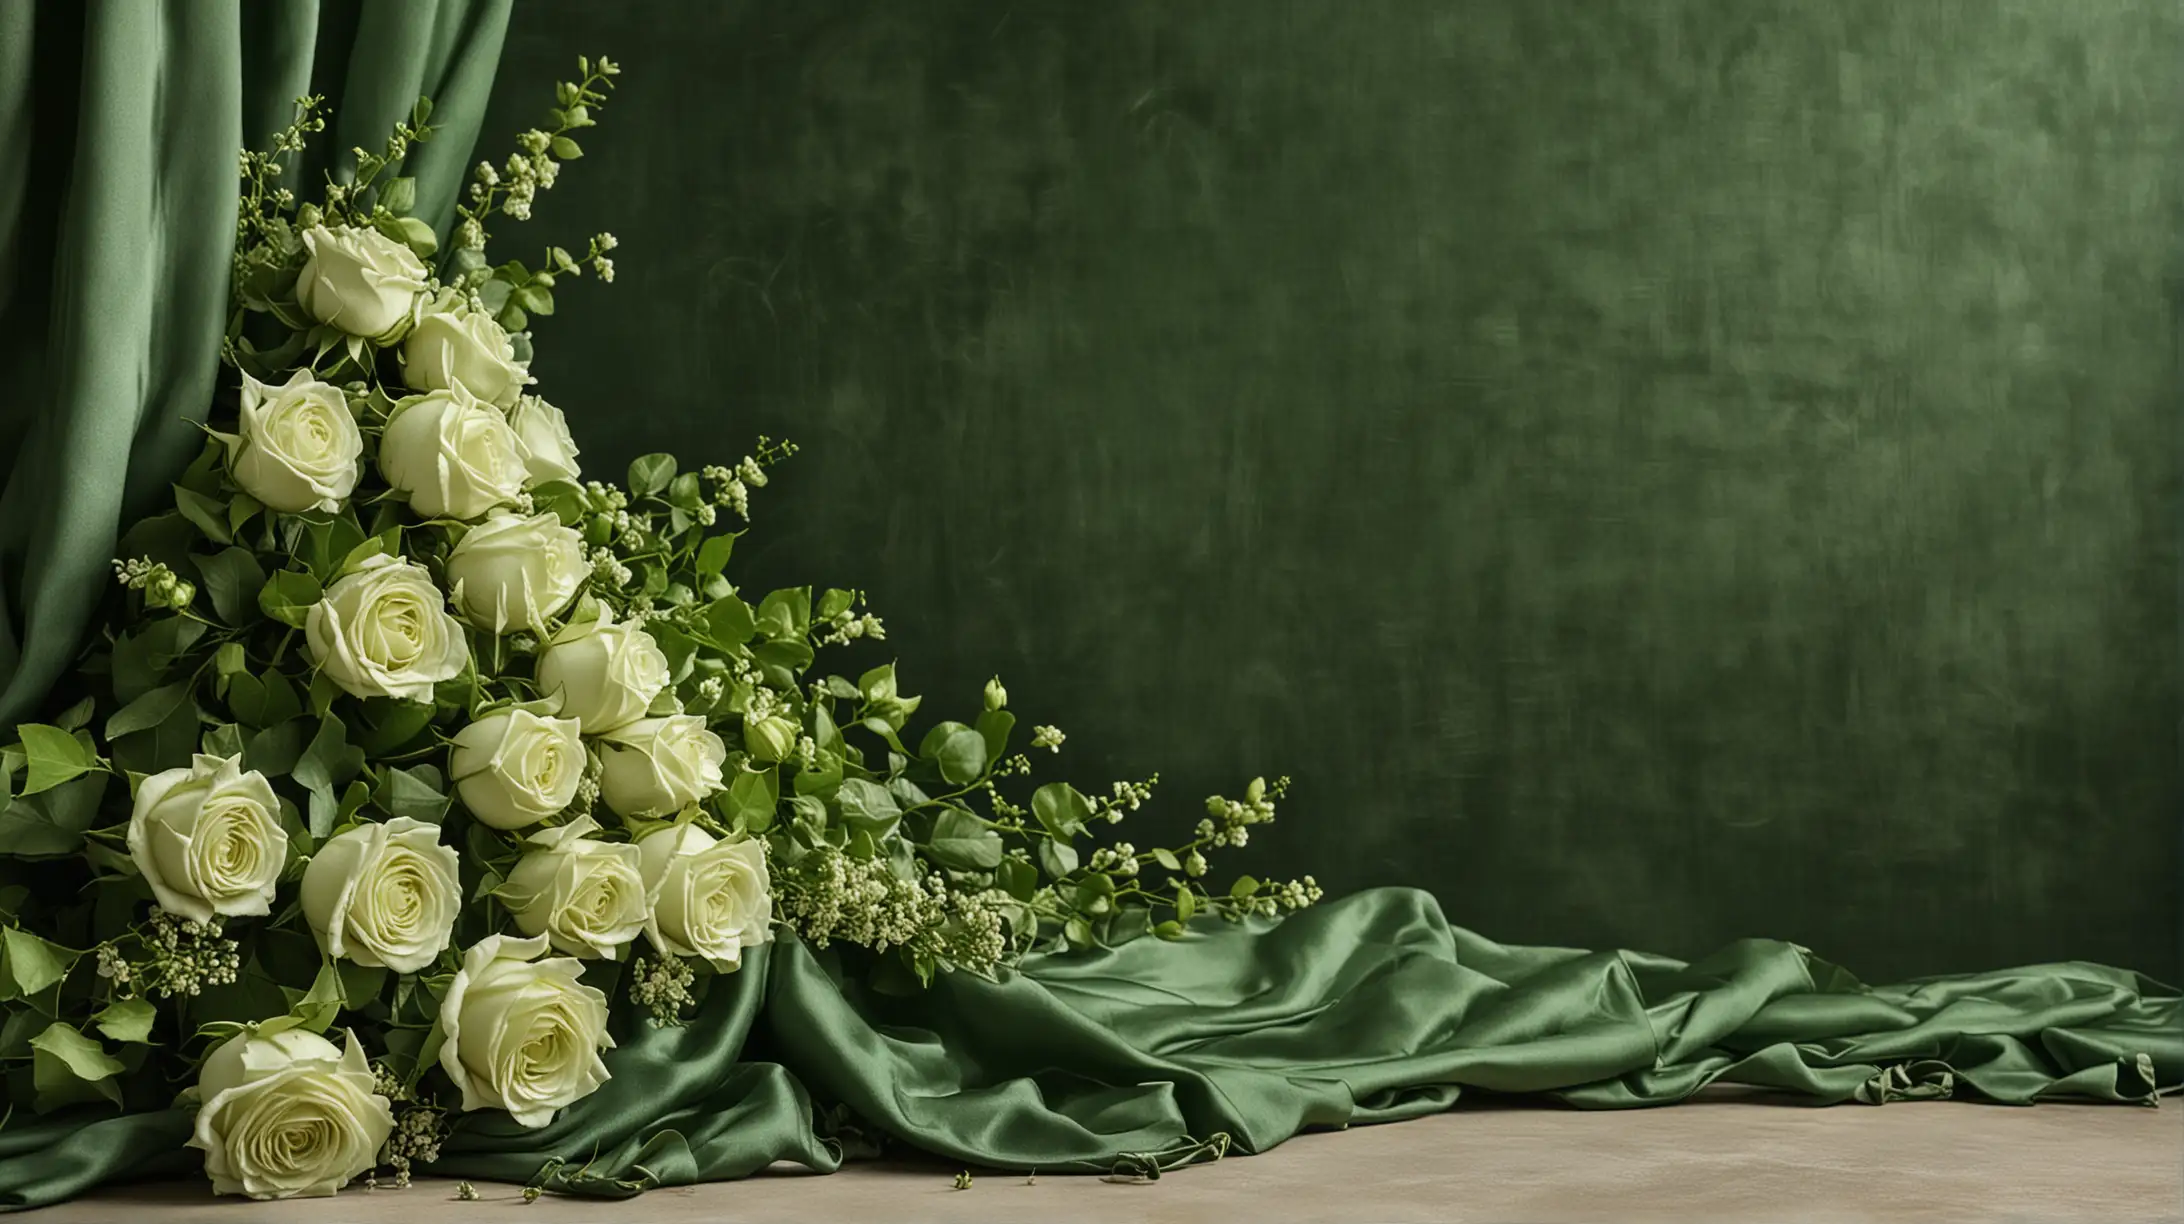 Elegant Green Velvet Backdrop with Roses and Draped Fabric